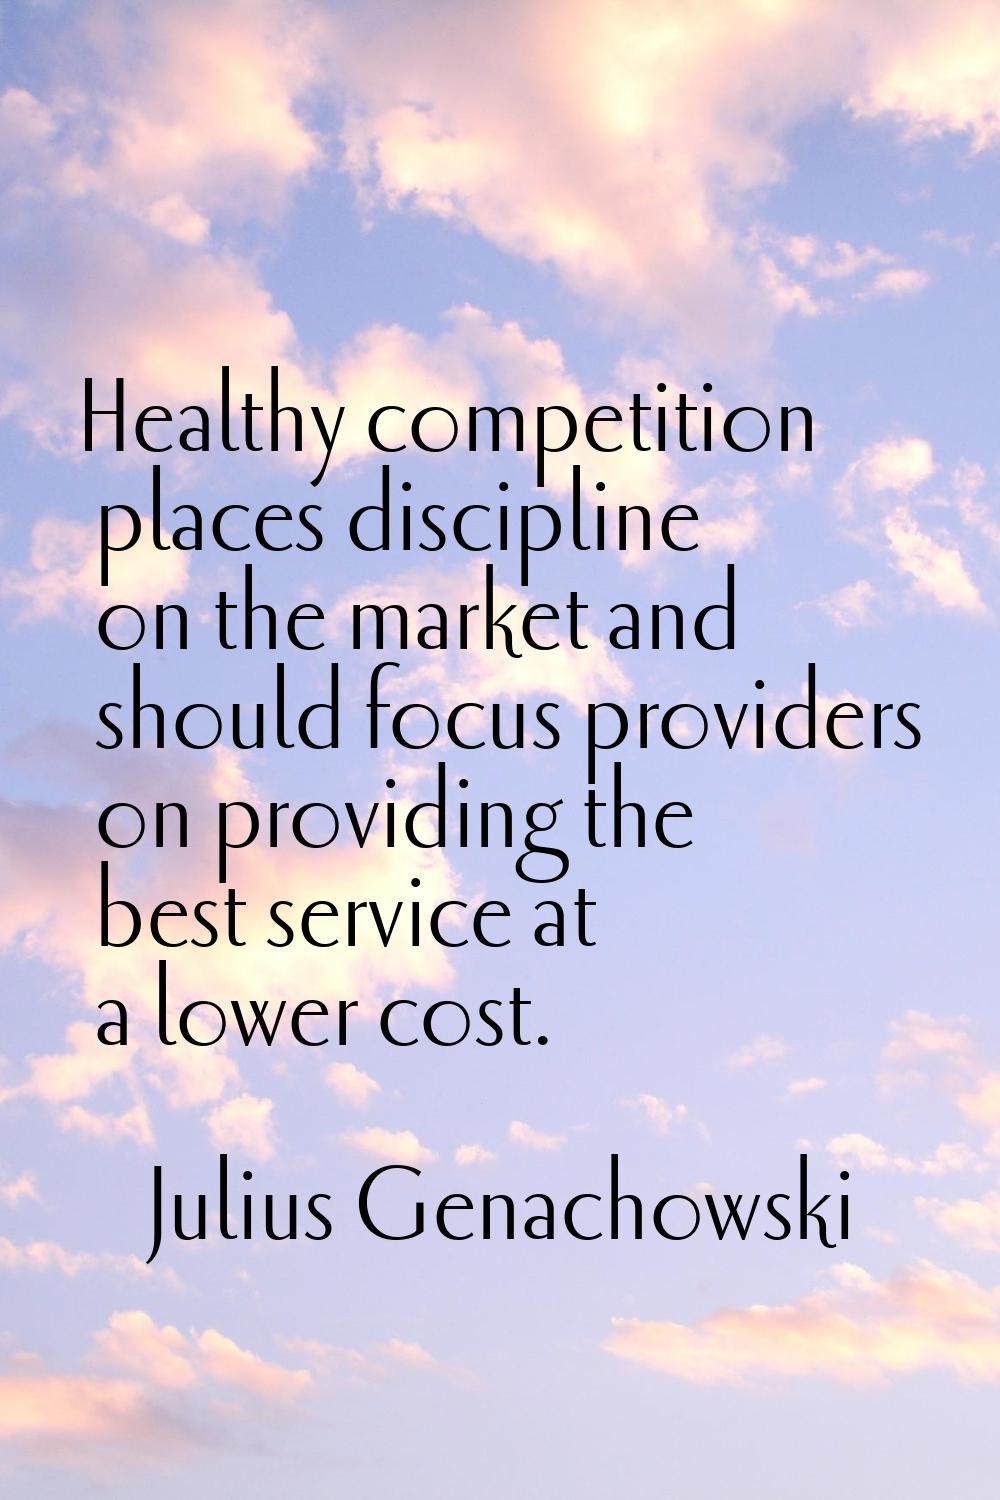 Healthy competition places discipline on the market and should focus providers on providing the bes